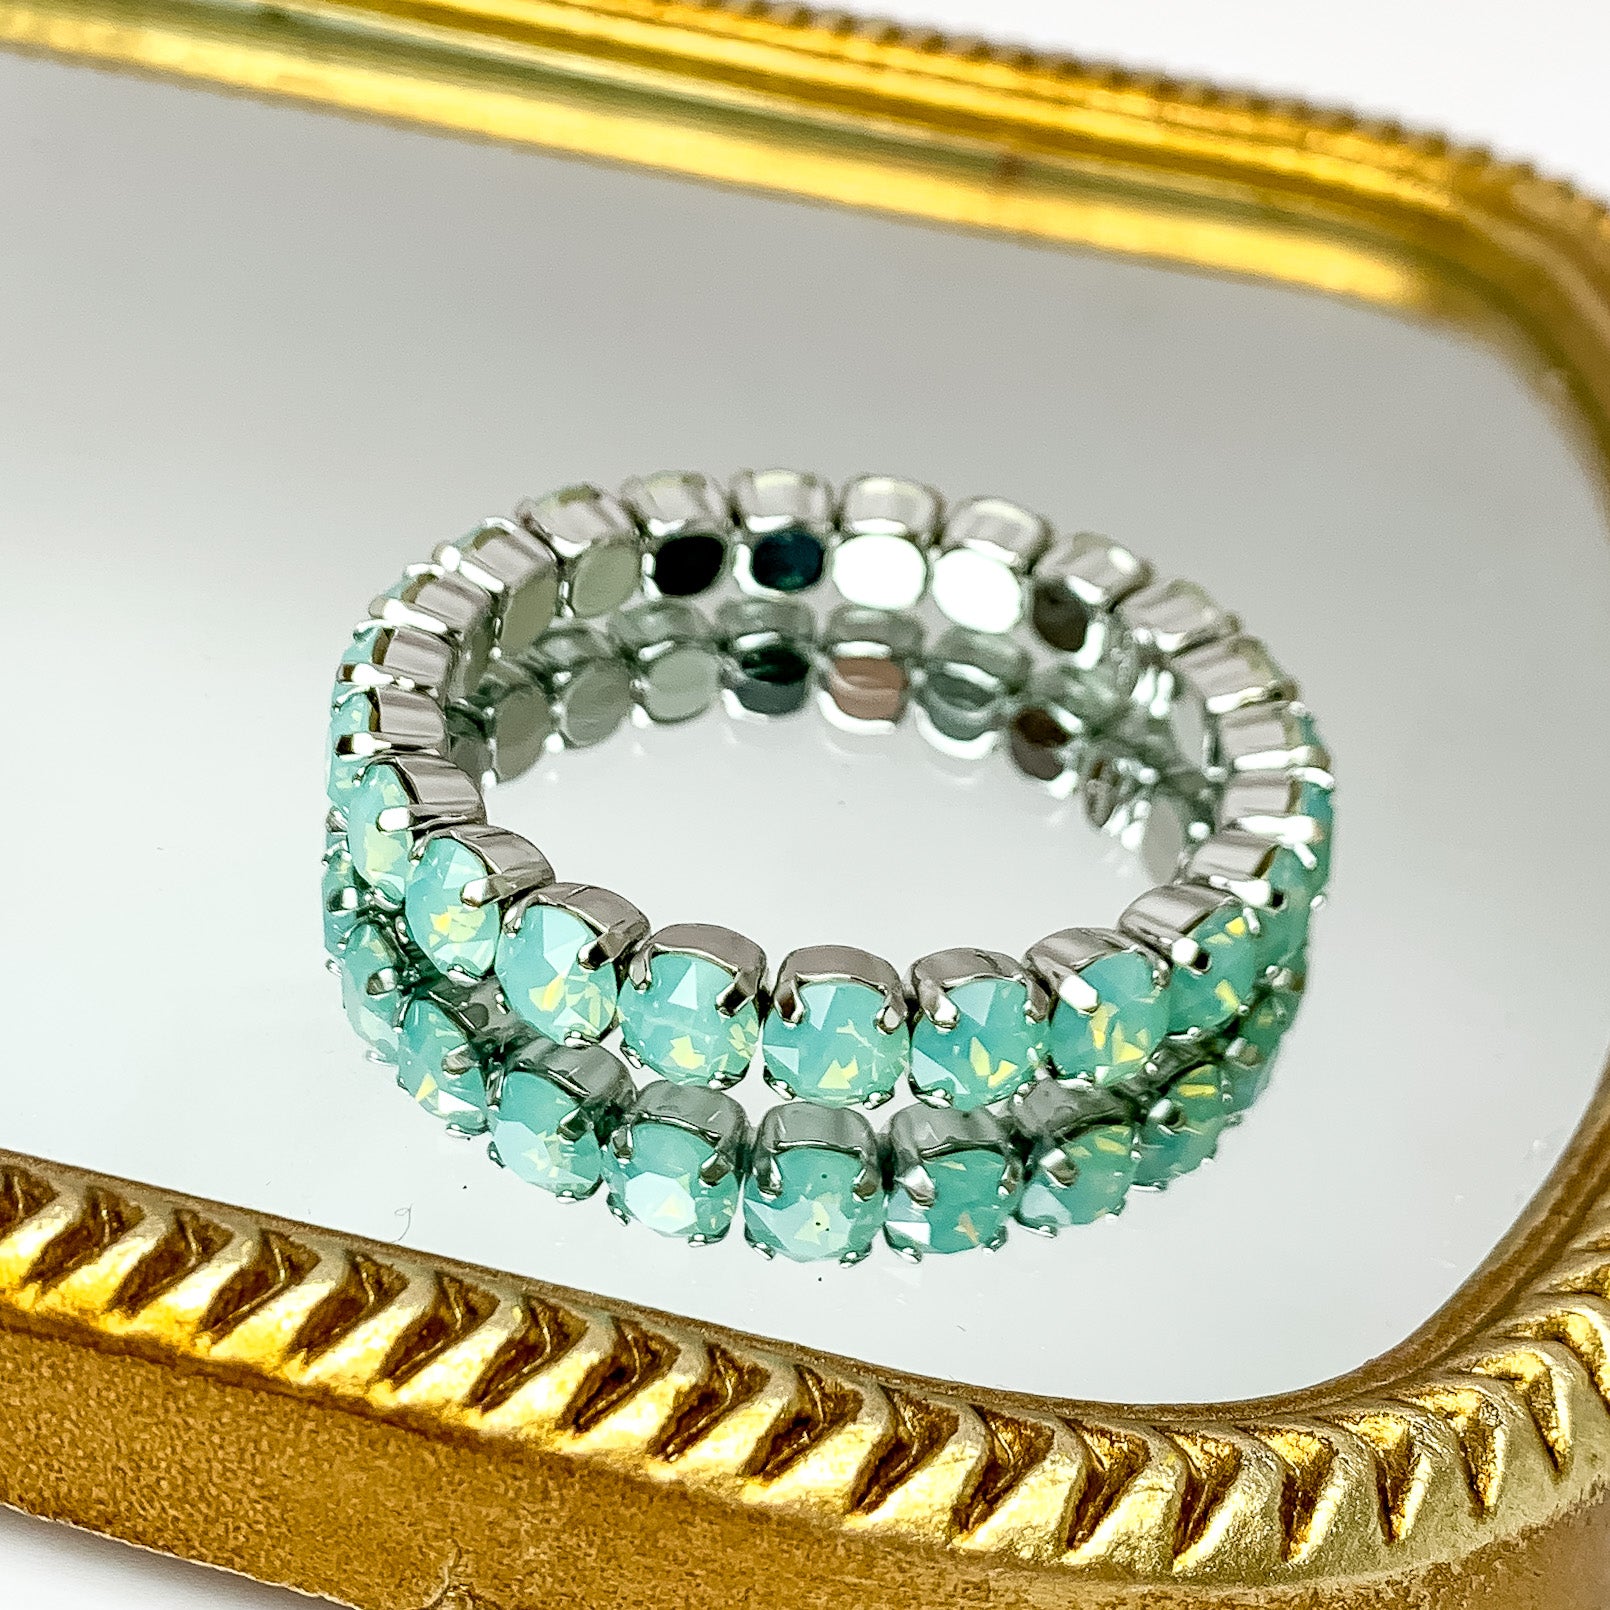 Single tier light blue crystal stretchy bracelt with silver undertones. Pictured on a mirror with a gold trim.